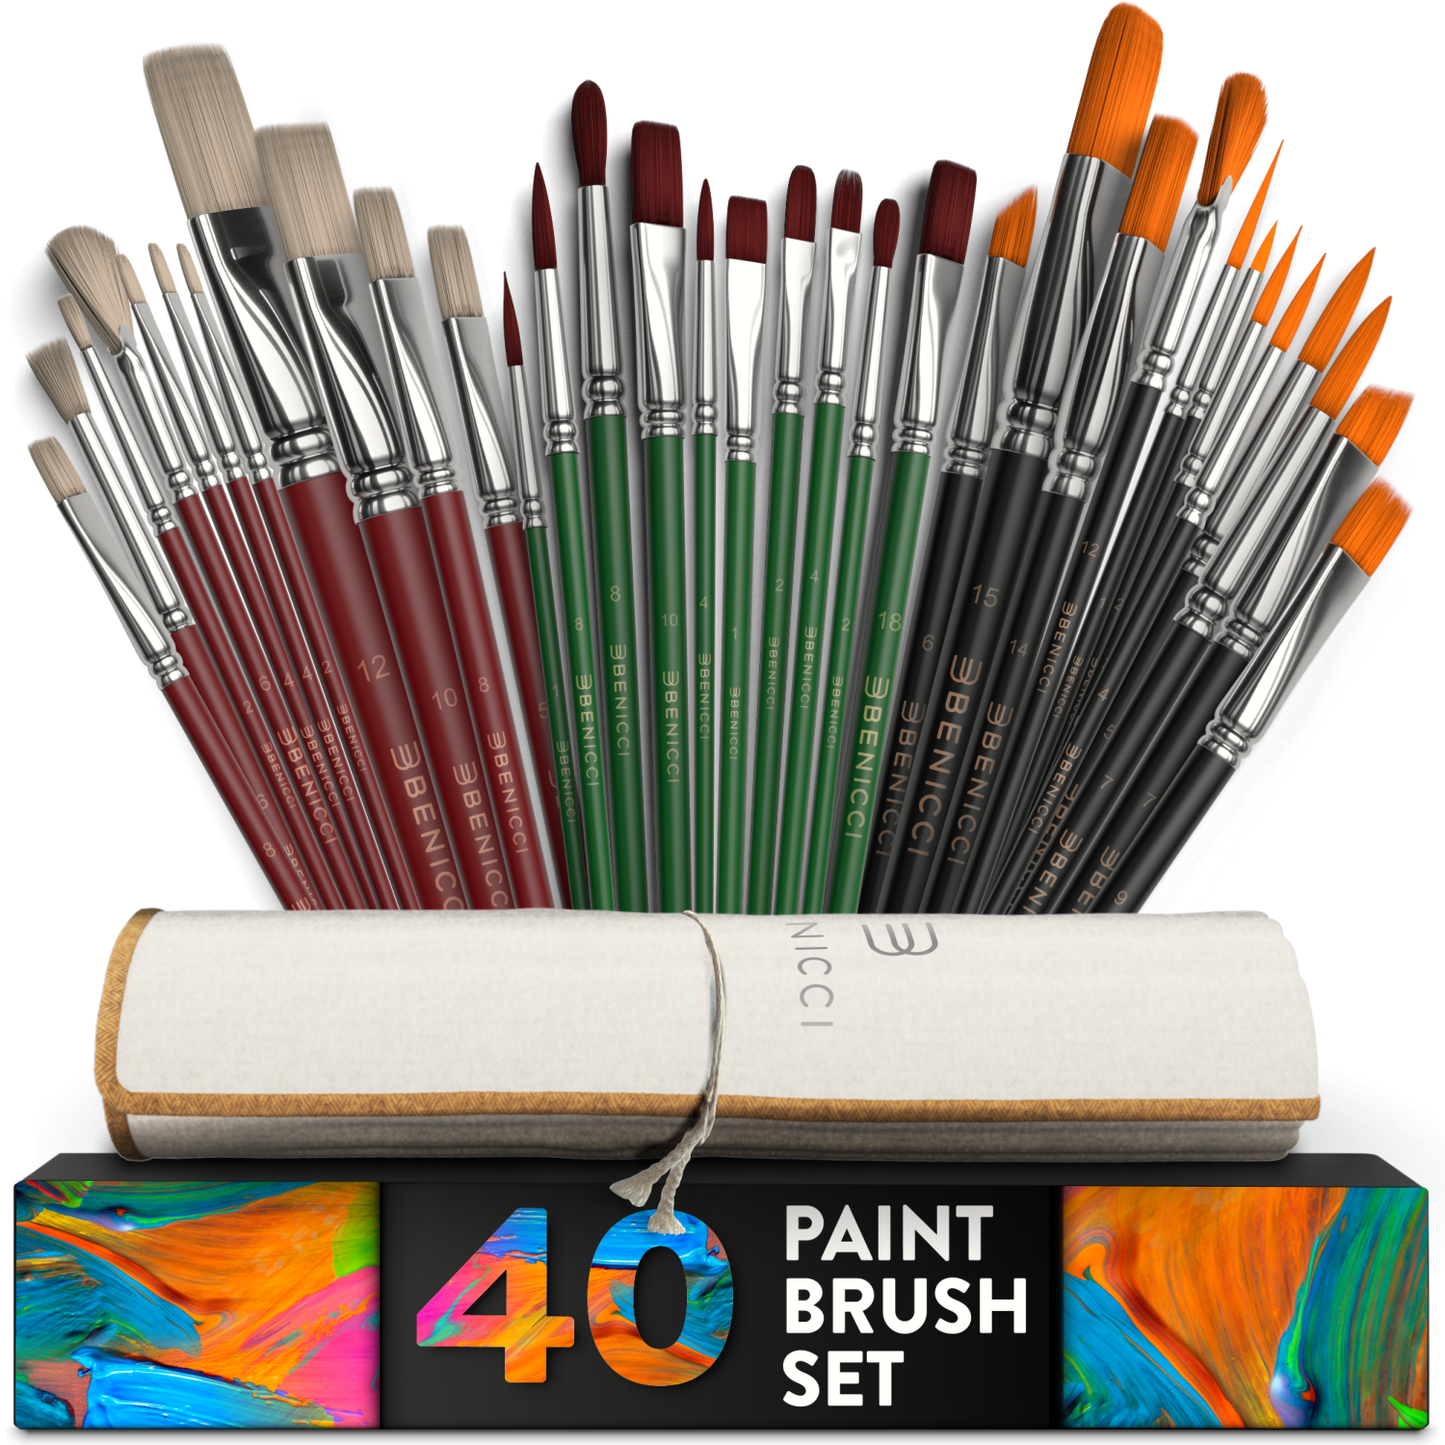 Easy Grip 40 Piece Artist Paint Brush Set with Storage Case - Includes Round and Flat Art Brushes with Hog, Pony, and Nylon Hair Bristles